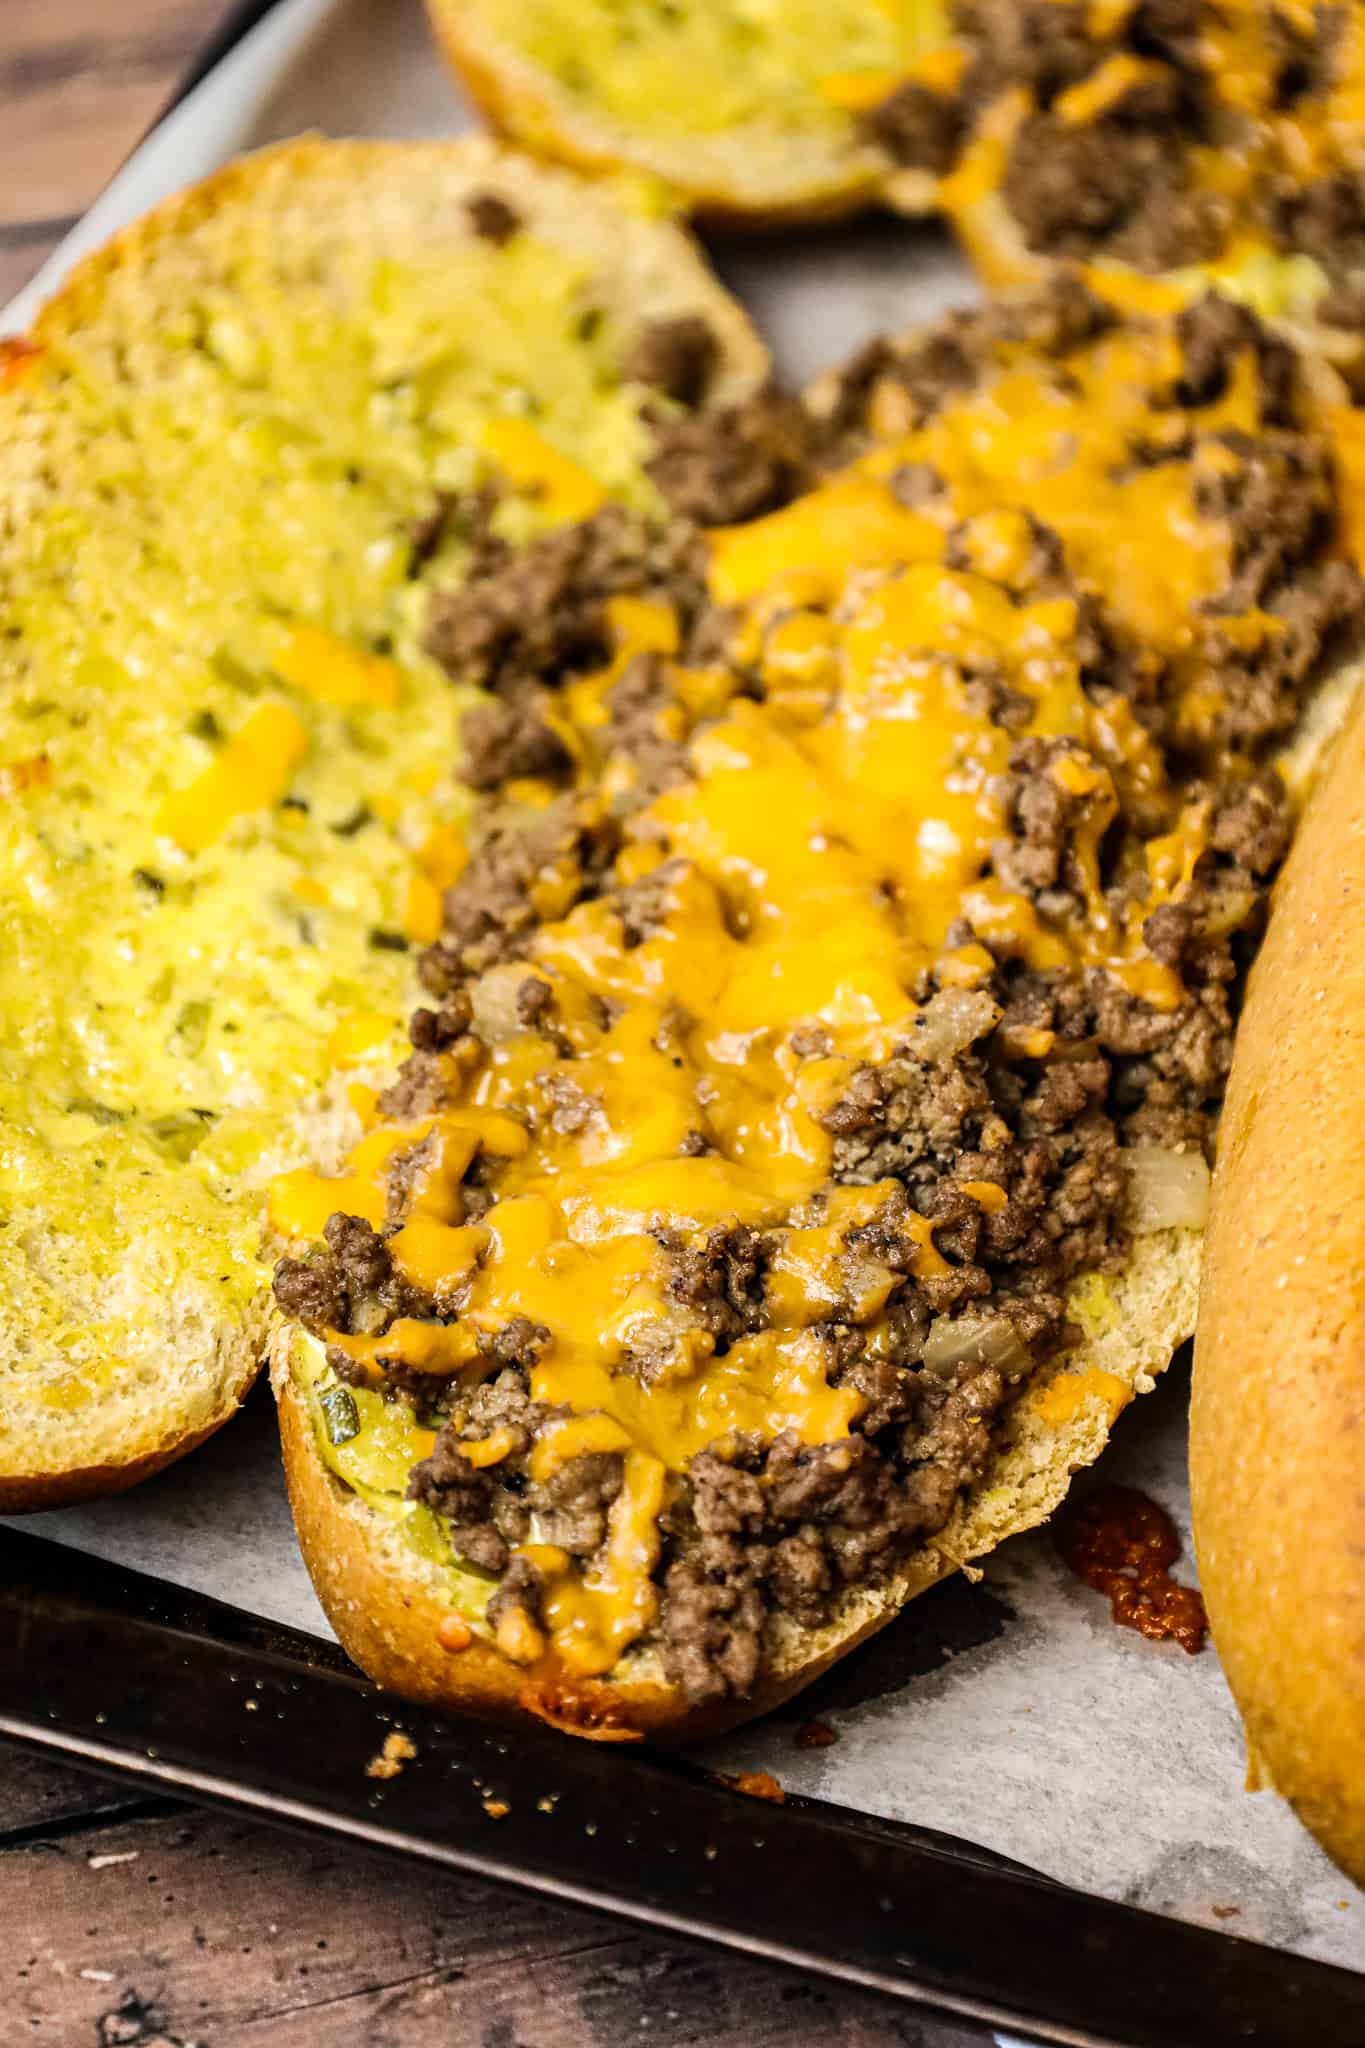 Cheeseburger Subs are an easy family friendly dinner recipe loaded with ground beef, shredded cheddar cheese on a bun spread with a special mayo sauce.